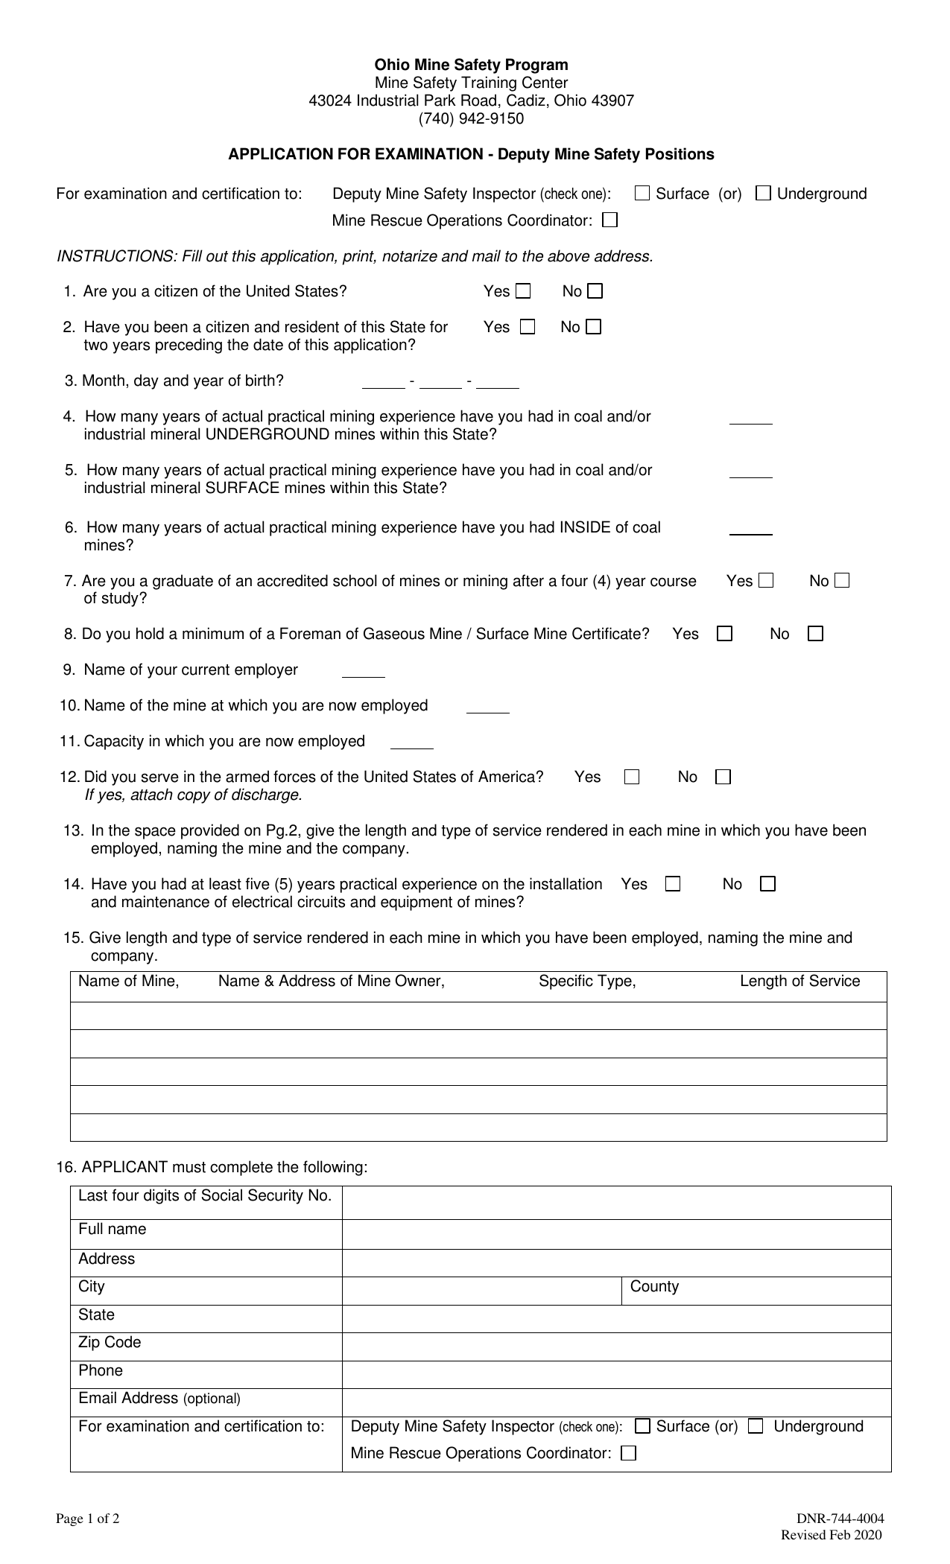 Form DNR-744-4004 Application for Examination - Deputy Mine Safety Positions - Ohio, Page 1